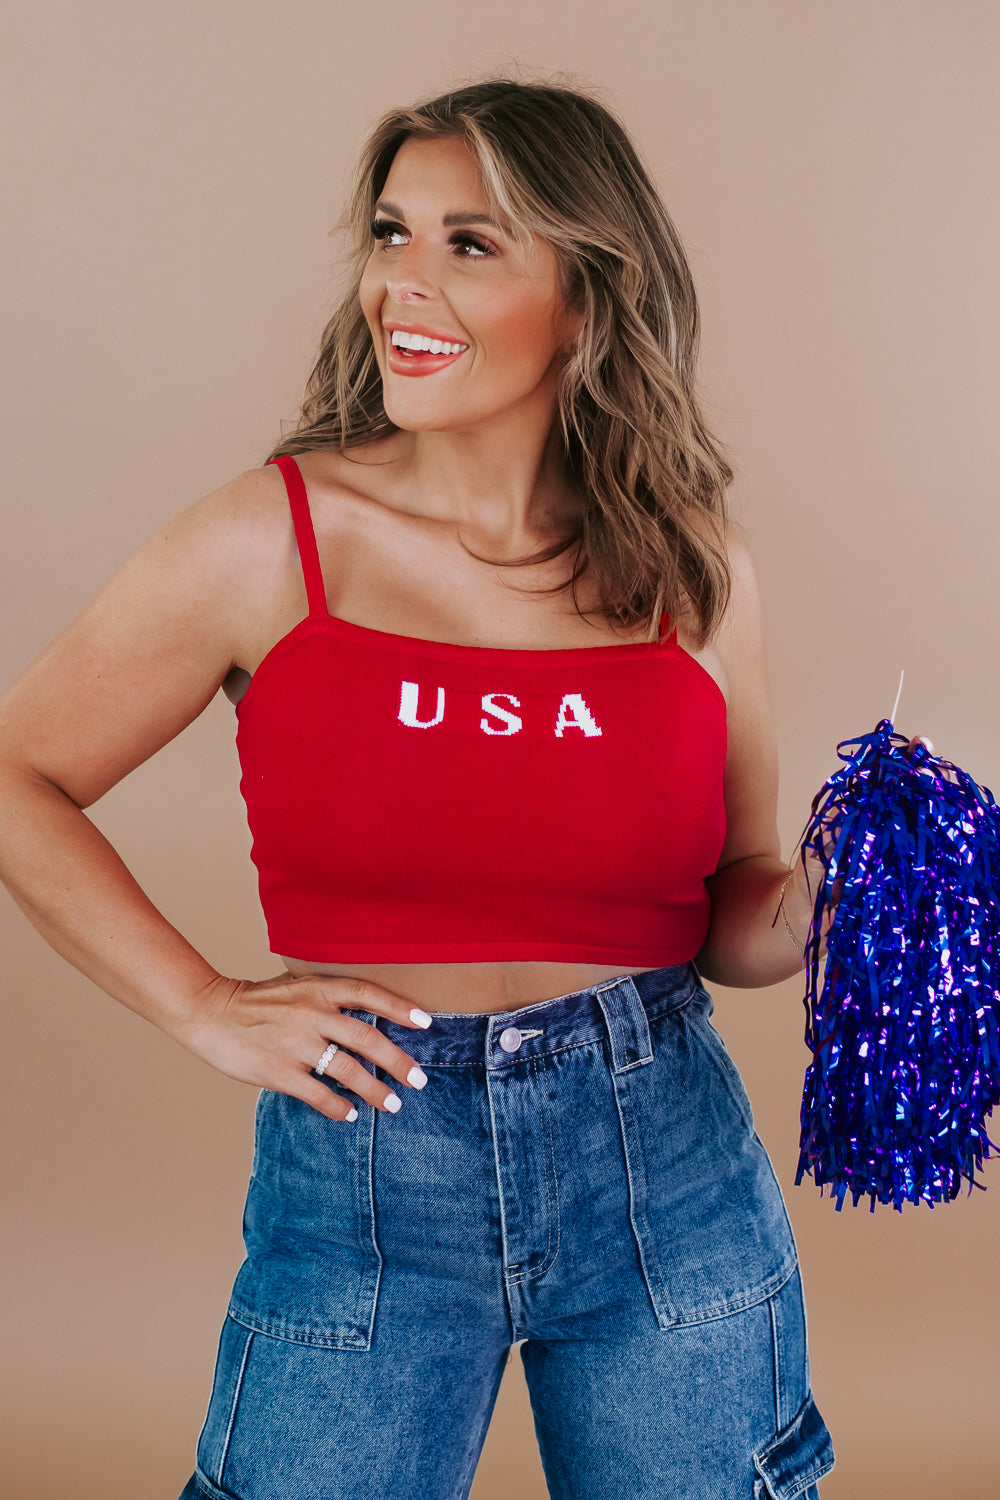 USA cropped tee, USA tank - 4th of July tank - 4th of July outfit inspo